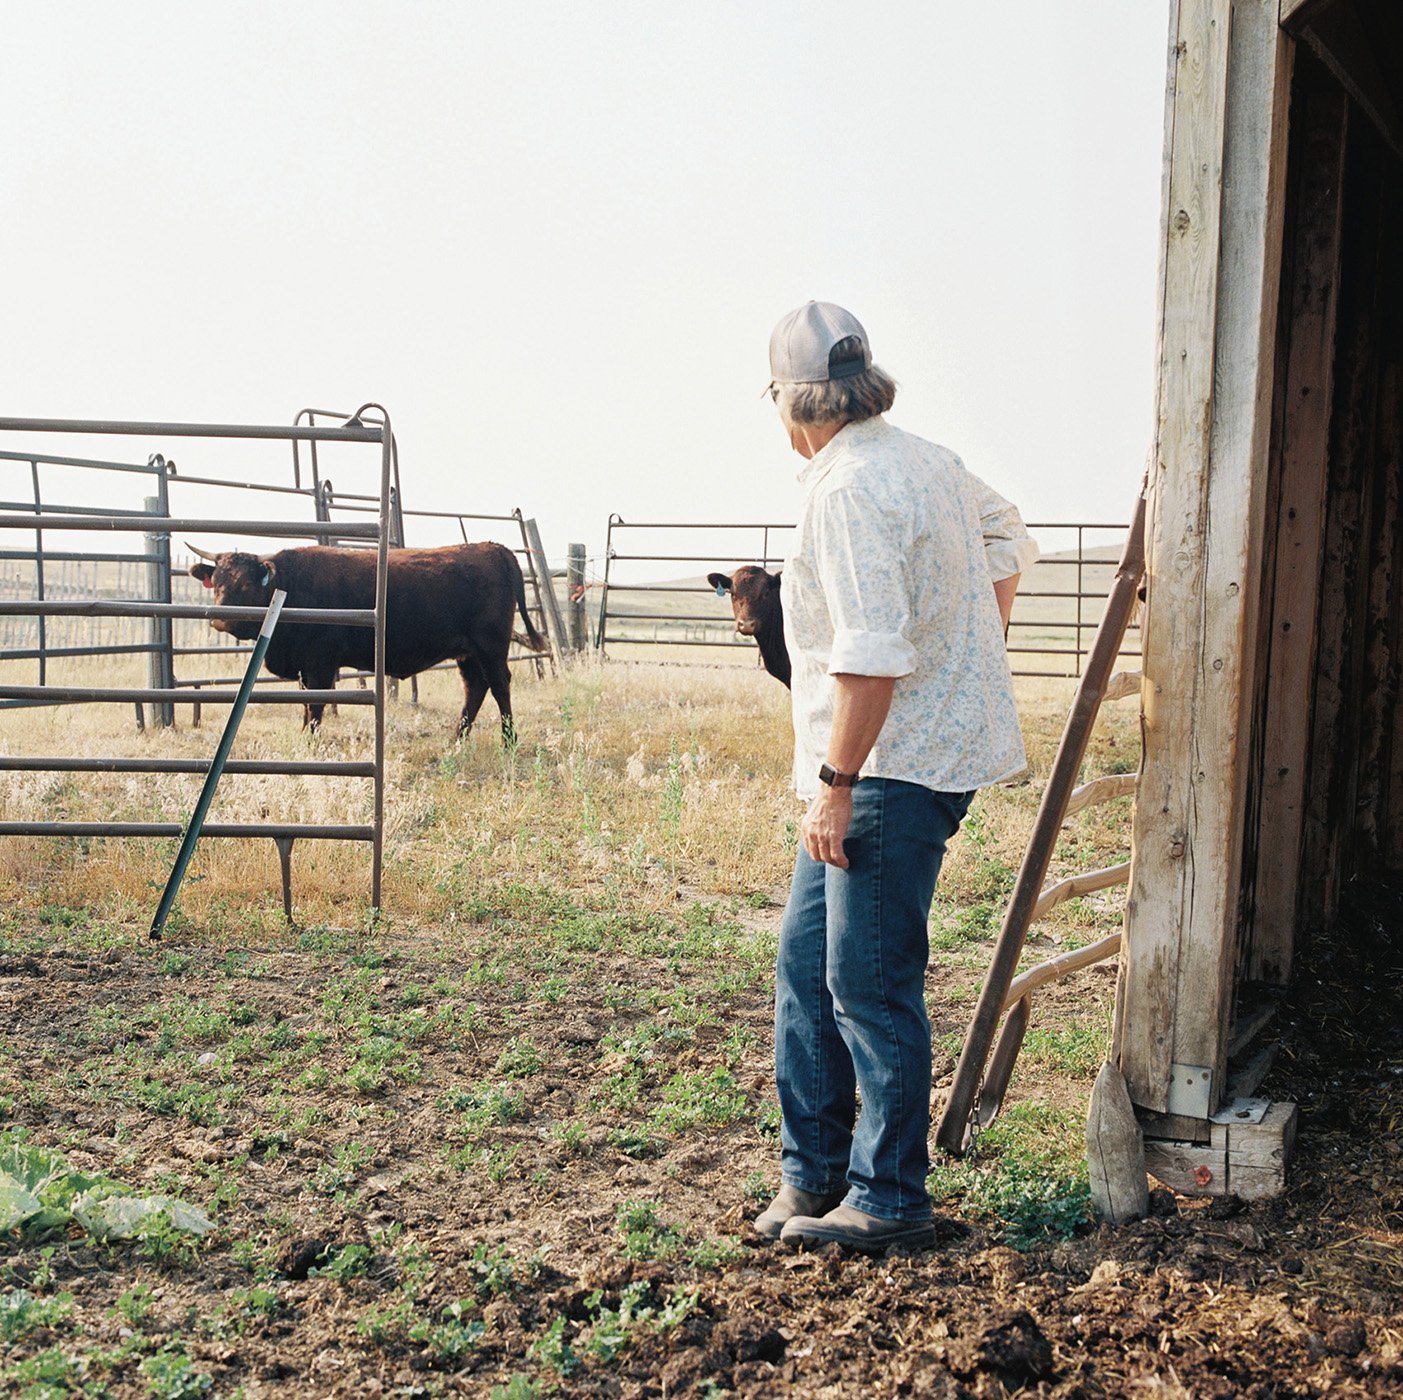 Farmer tending to cows in pen shot by Abigail Bobo for First Opportunity Bank